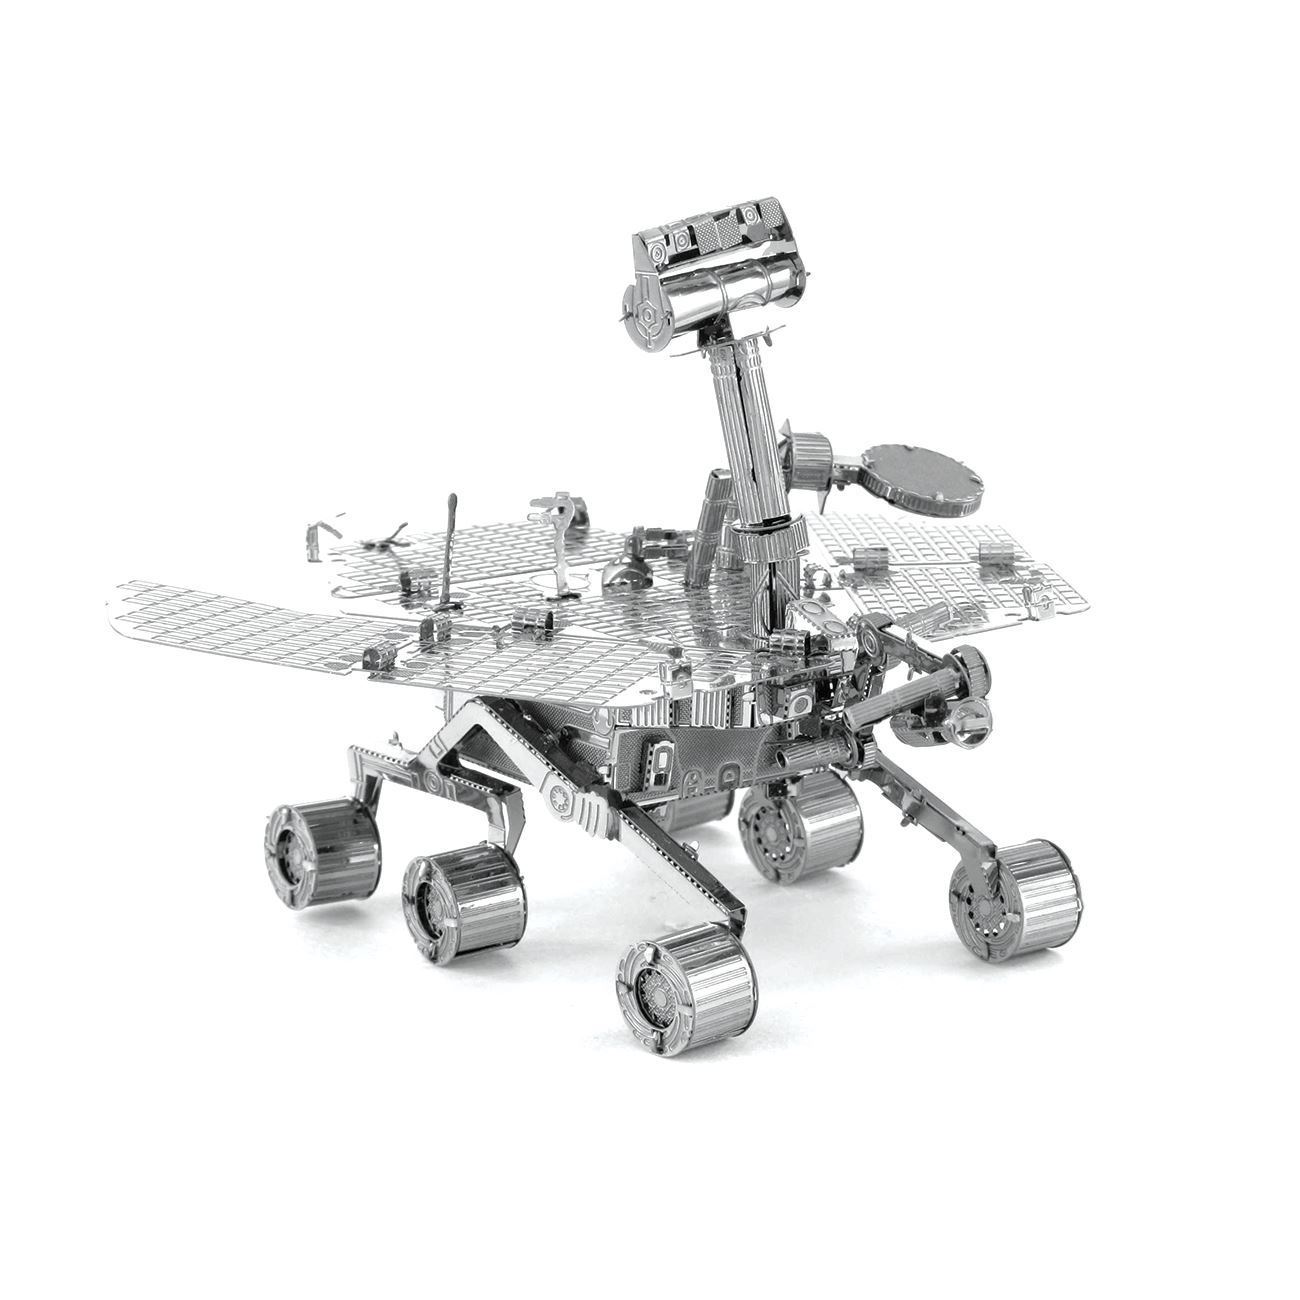 Ripin mp0027j 3d metal puzzle Model Mars Rover Stainless Steel 